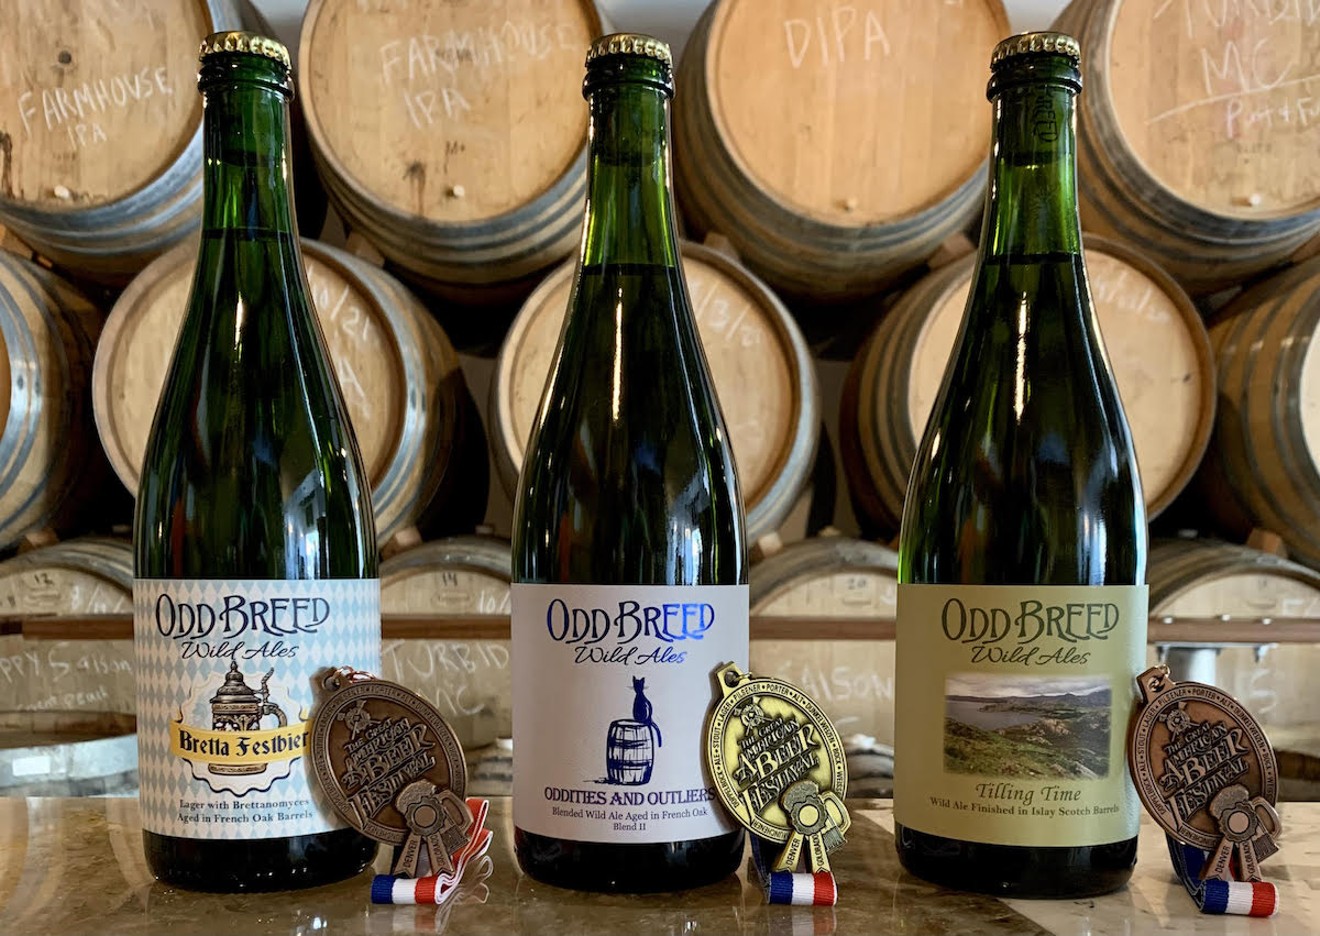 Odd Breed Wild Ales has three Great American Beer Festival awards to celebrate during its fifth anniversary this month.